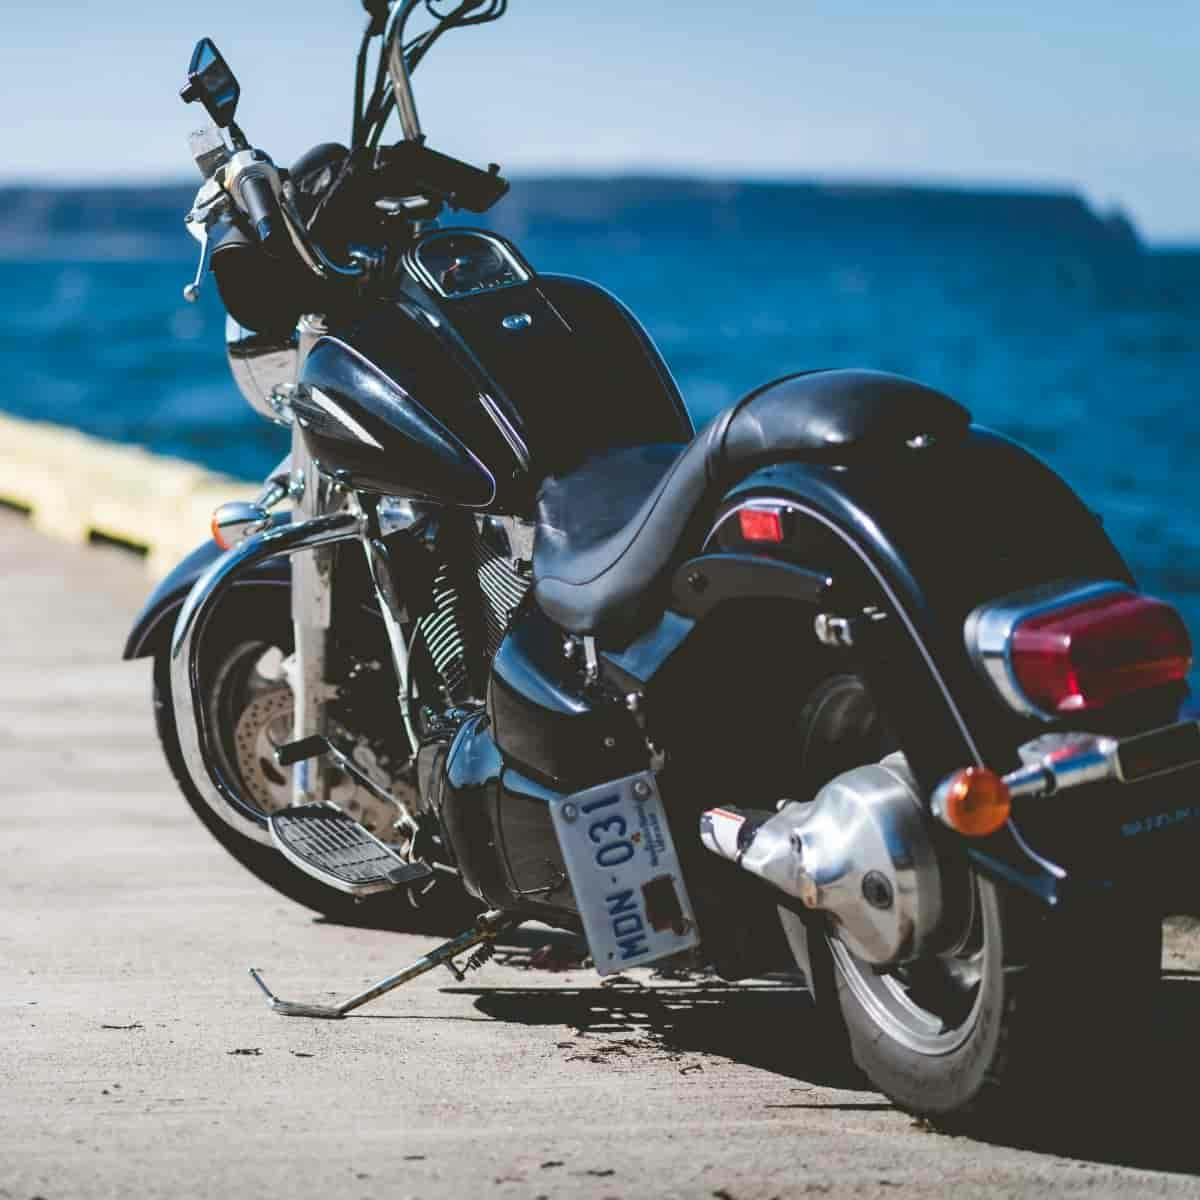 Riders Share: 5 Motorcycle Routes near Honolulu for the Fearless Island